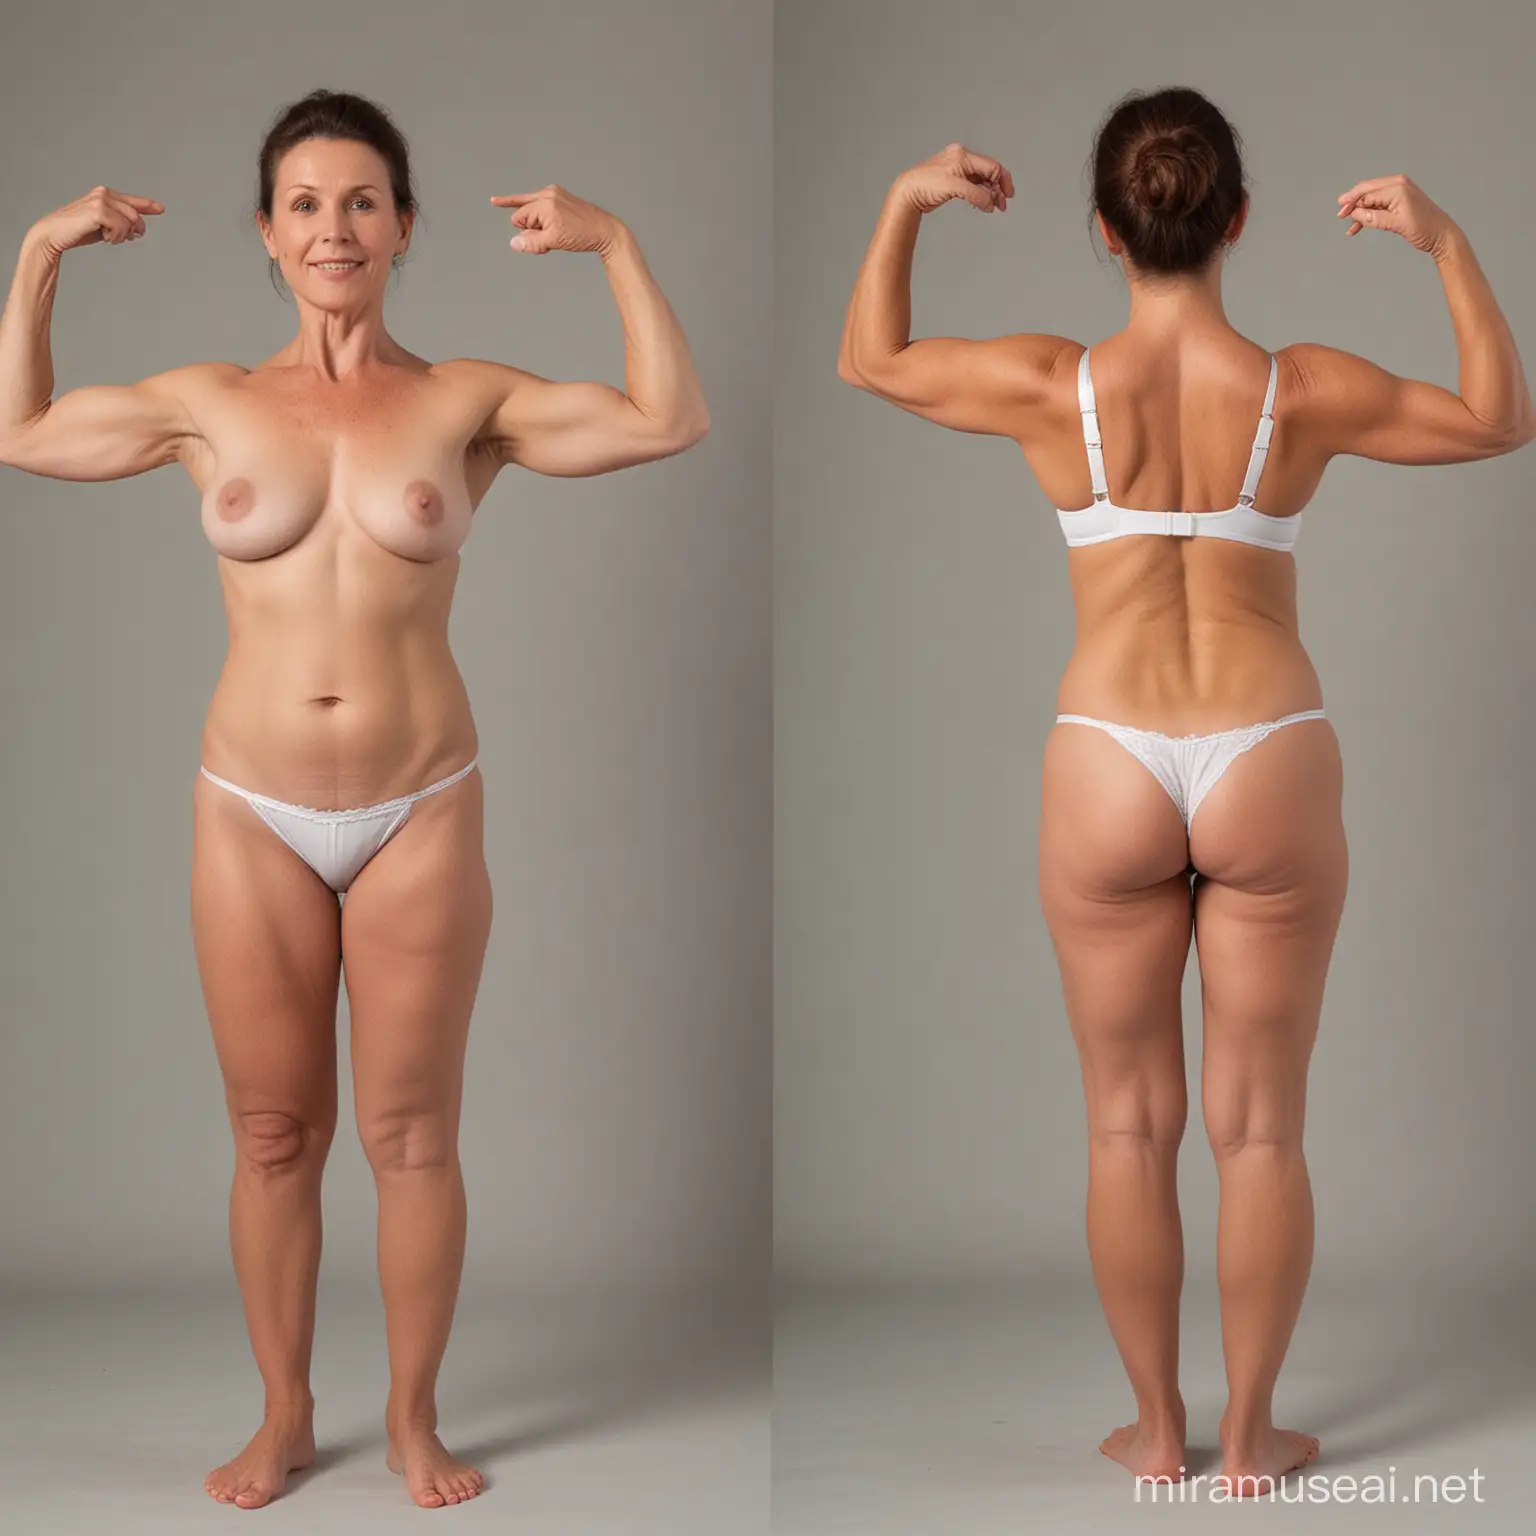 57 year old female in different poses